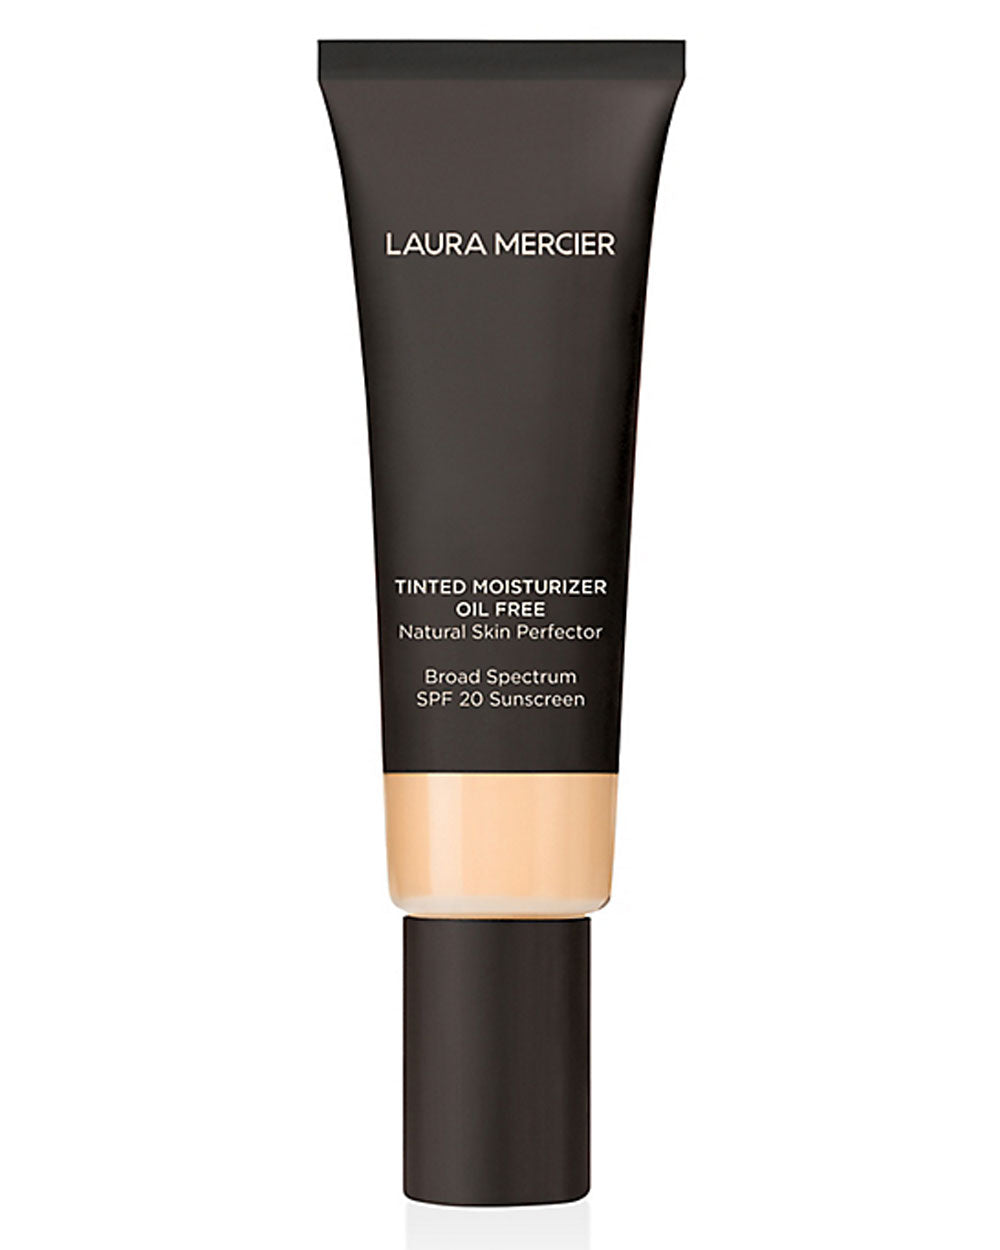 Oil Free Tinted Moisturizer in Cameo